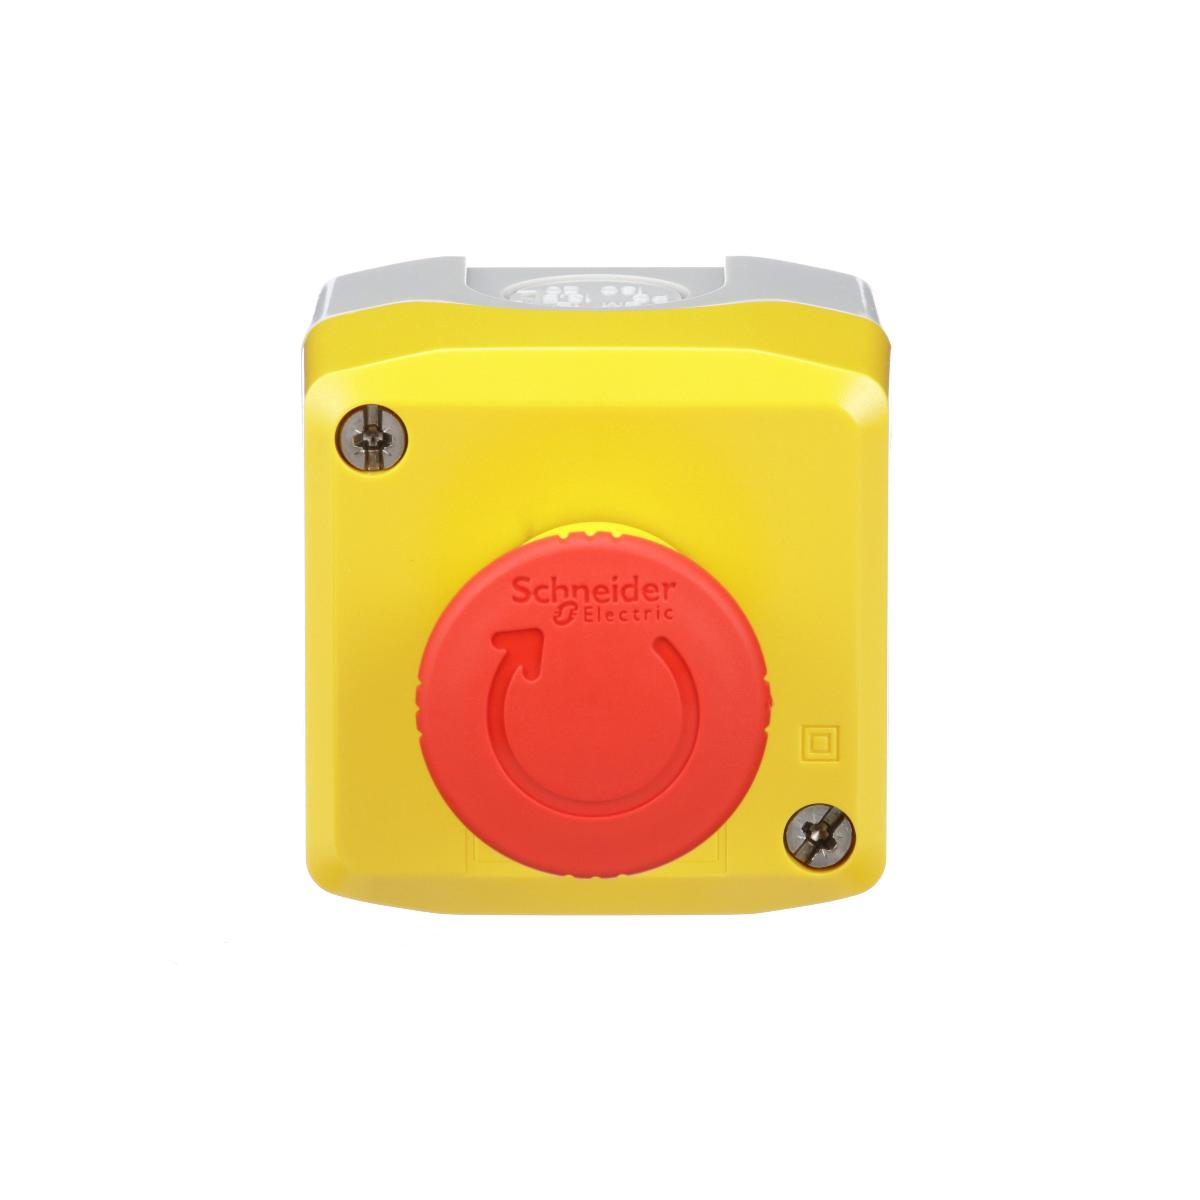 EMERGENCY STOP CONTROL STATION 40mm